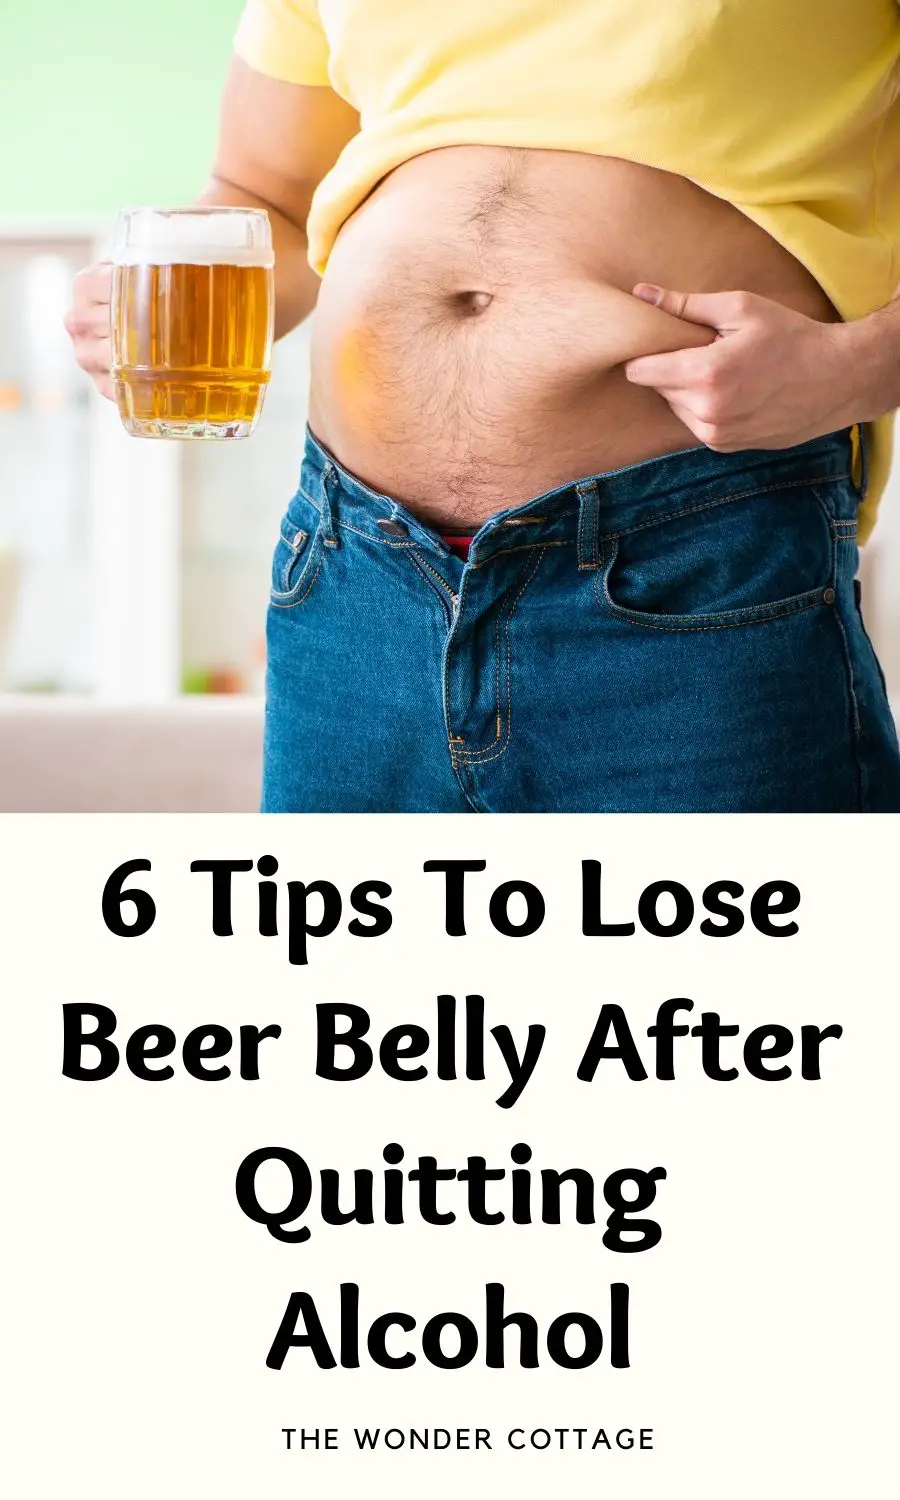 6 Tips To Lose Beer Belly After Quitting Alcohol